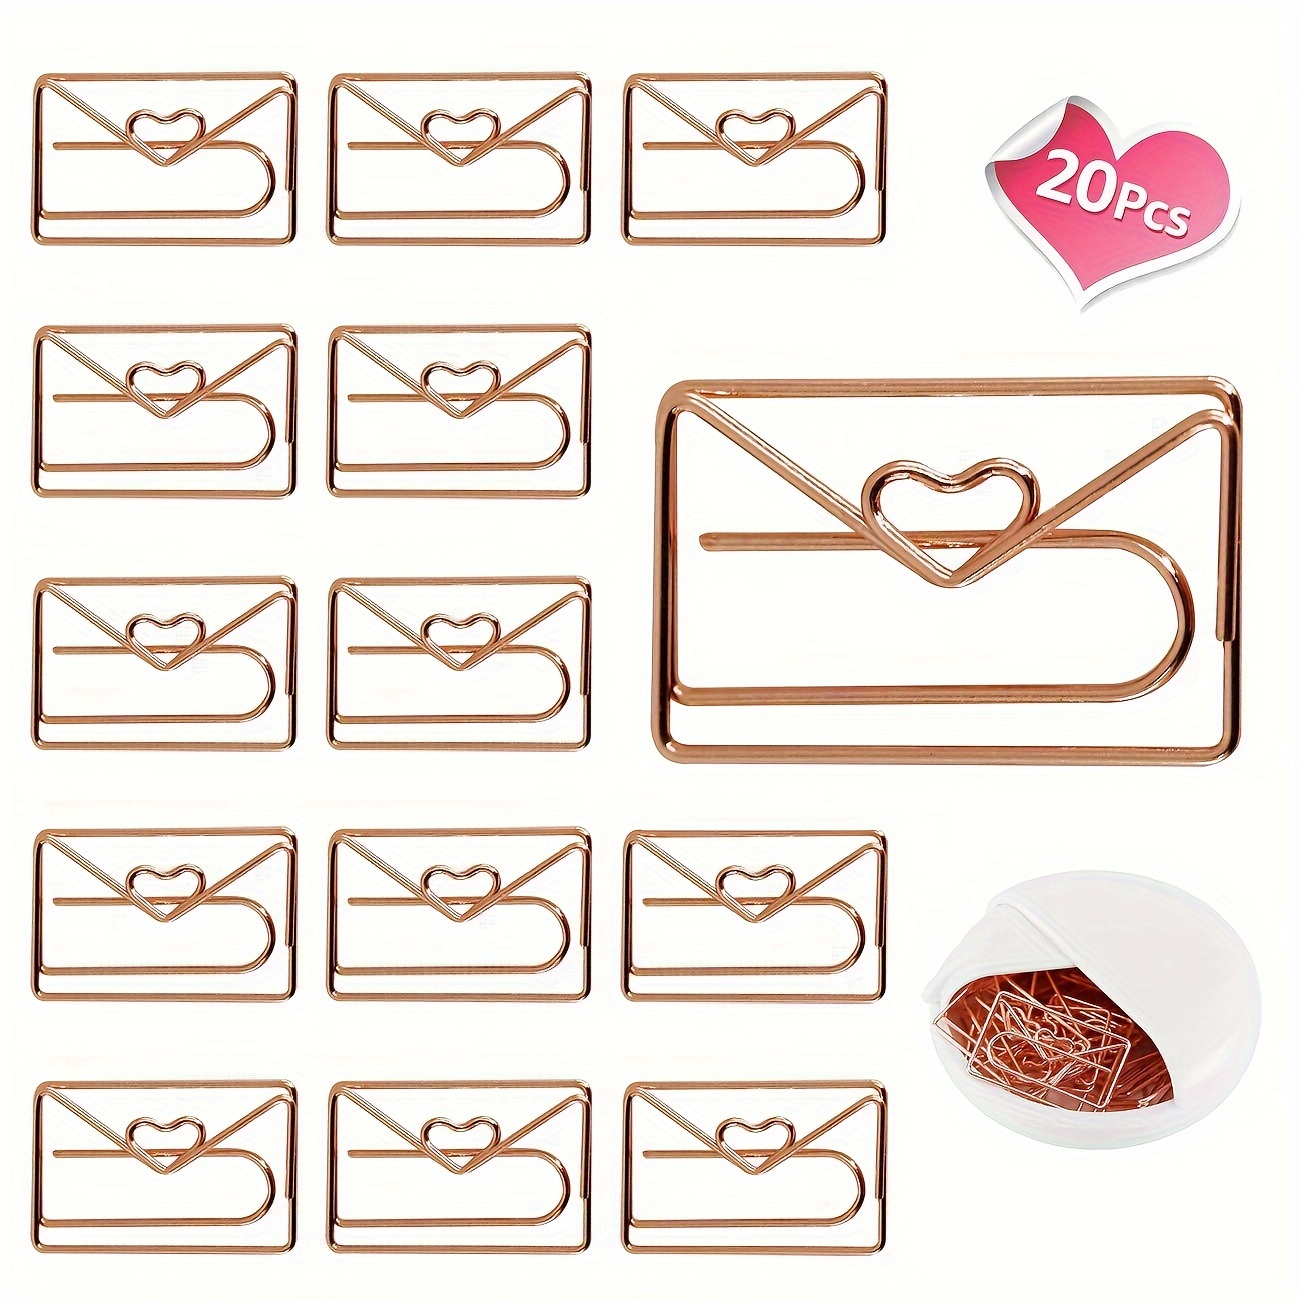 

20pcs Envelope-shaped Paper Clips, Rose Golden, Interesting Cute Paper Clip Bookmarks For Planners, School Gifts, Wedding Decorations, File Note Clips For Office And School Party Invitations